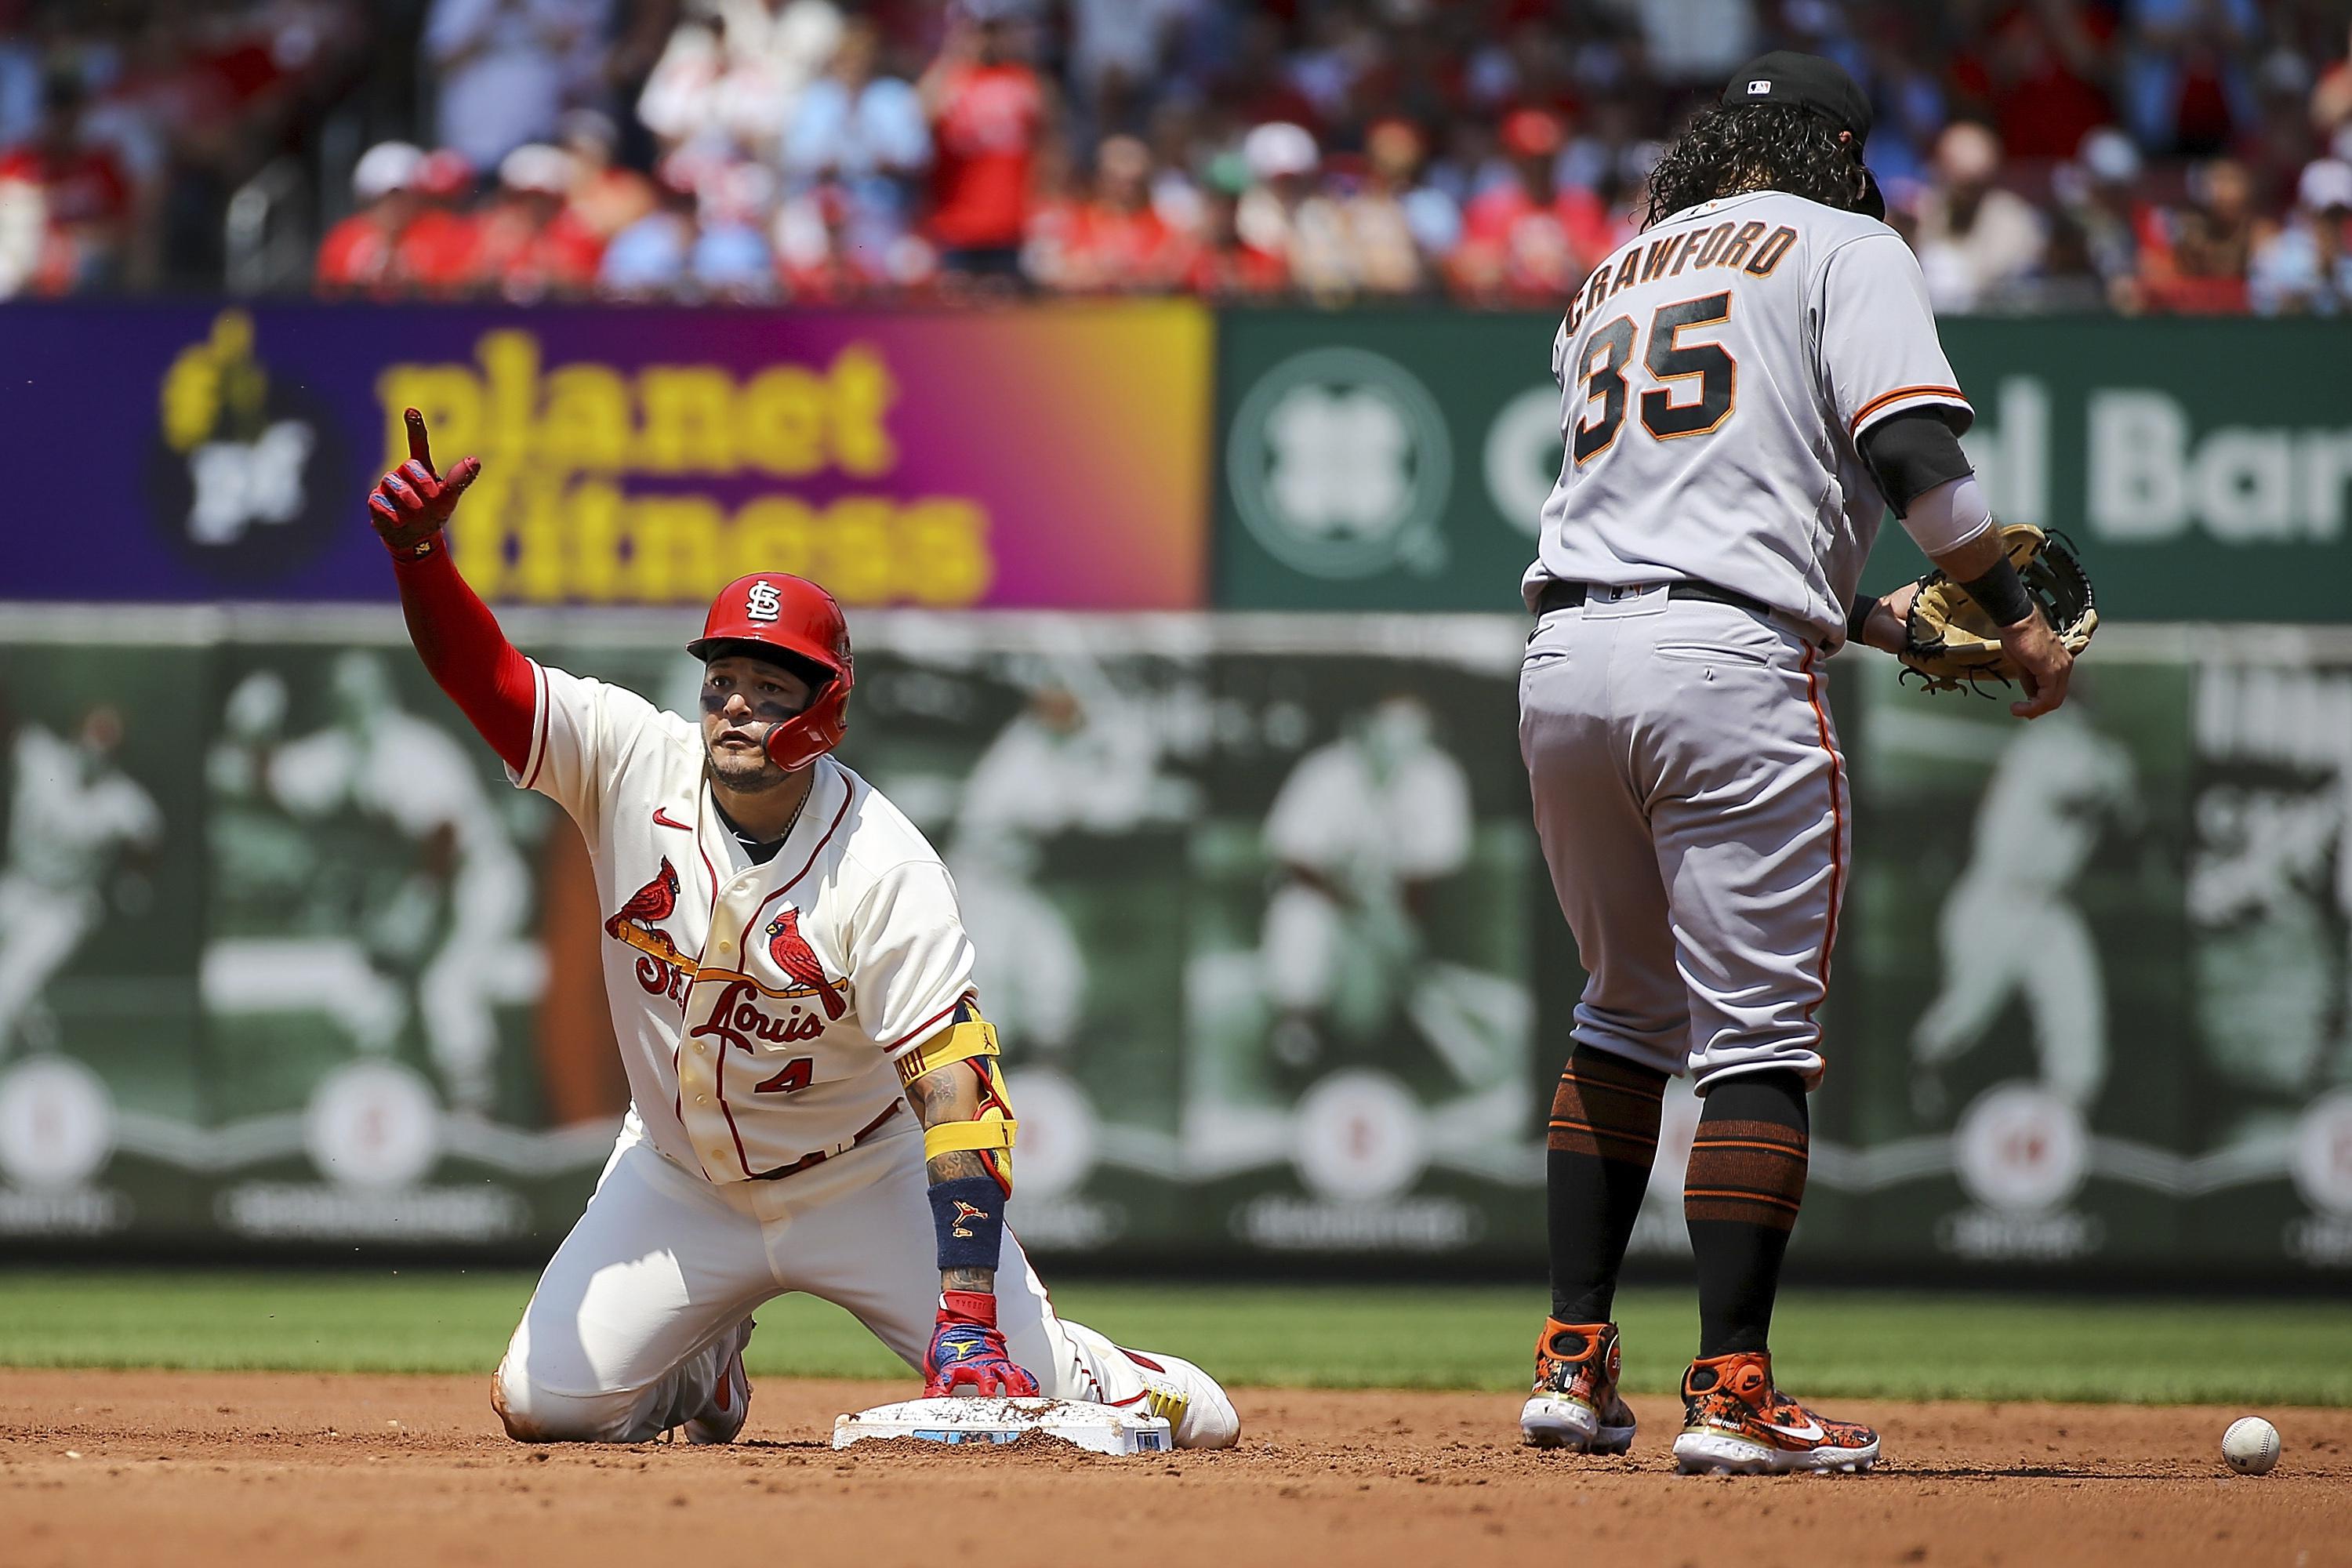 Yadier Molina goes on Bereavement List; Herrera called up from